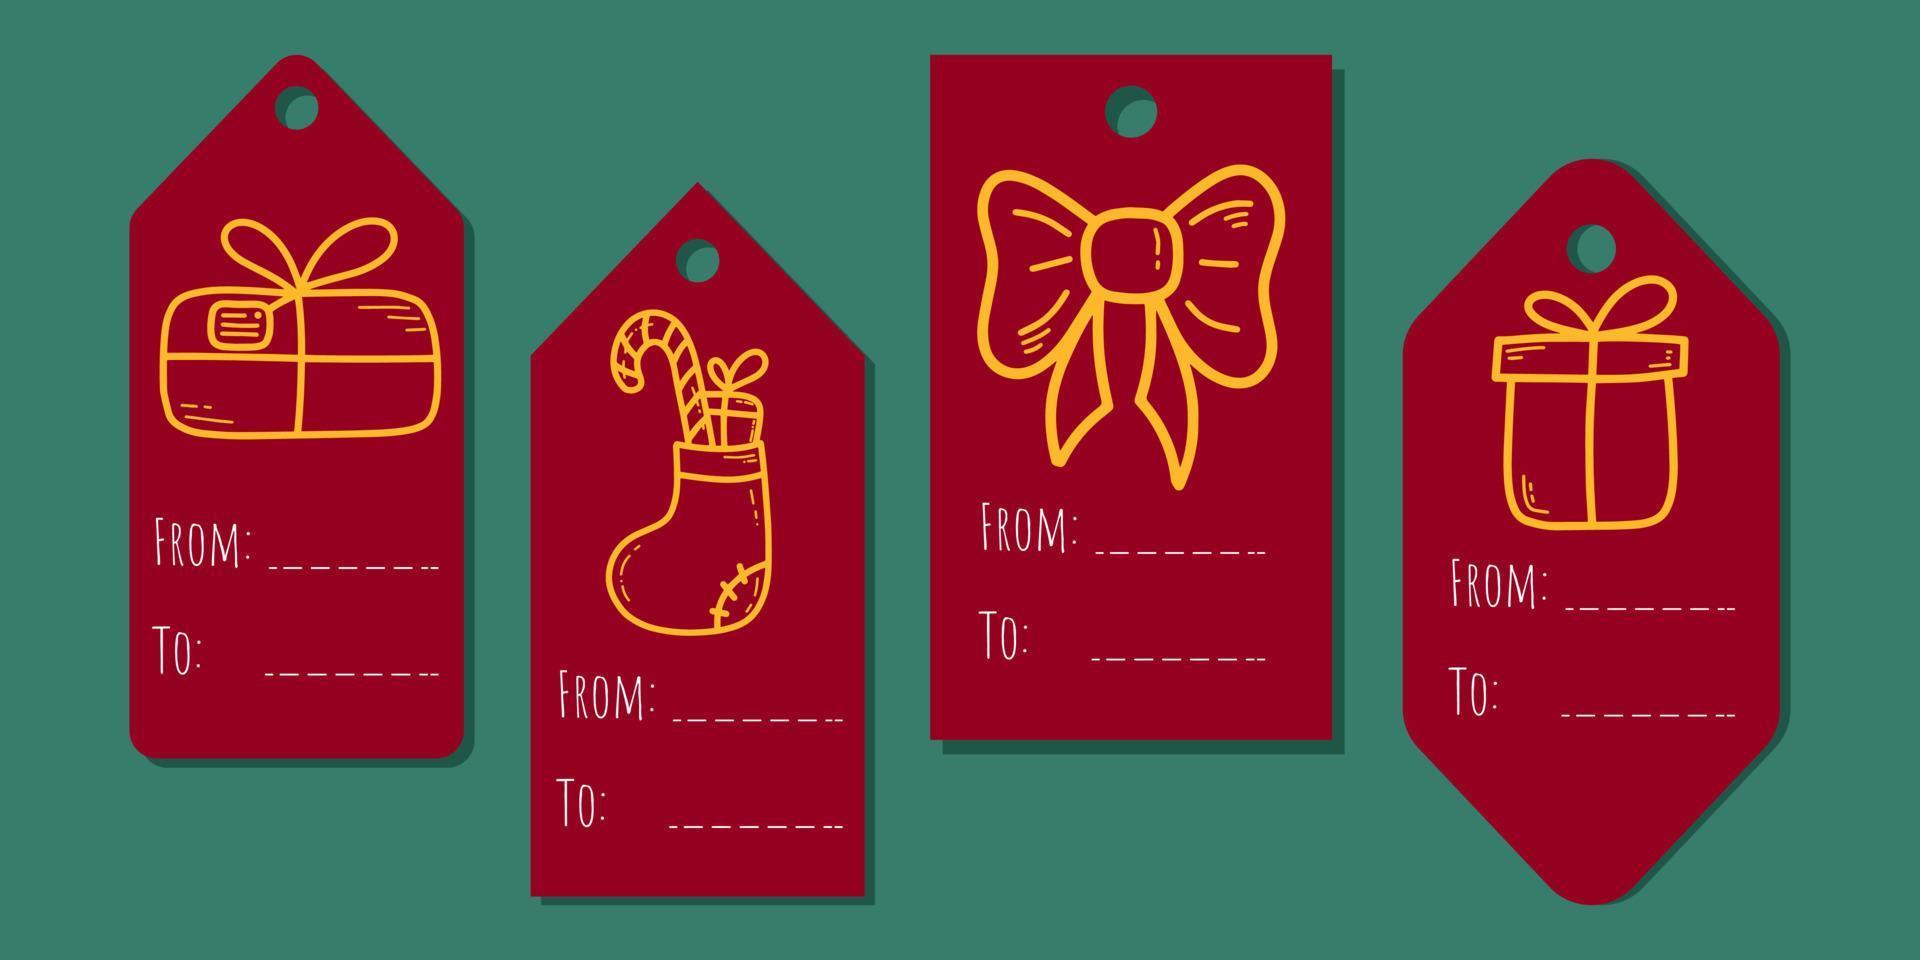 Christmas cute gift tag with doodle vector illustration